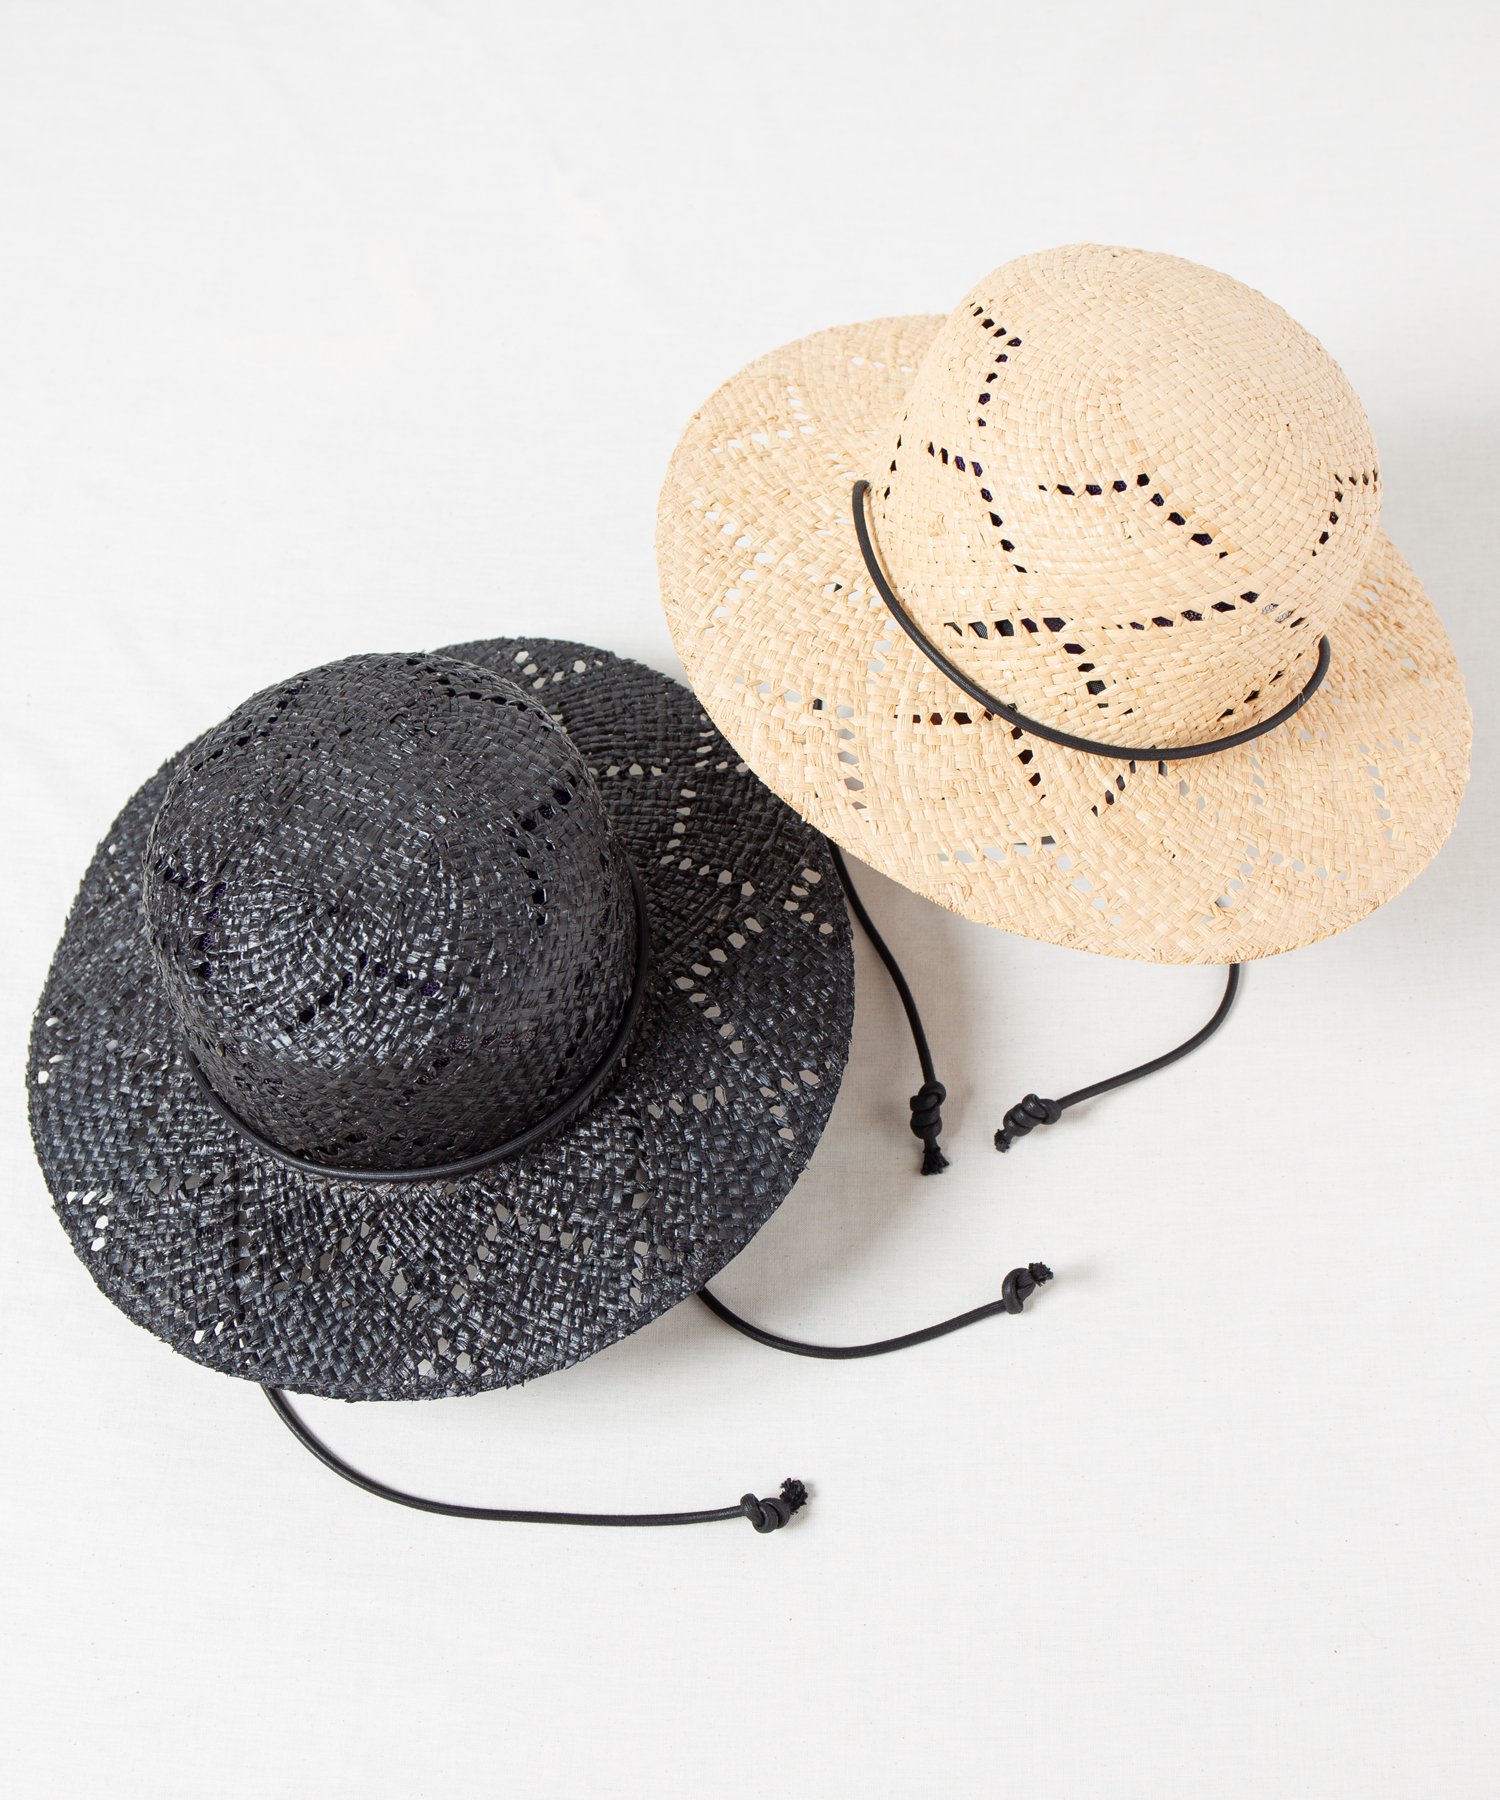 <img class='new_mark_img1' src='https://img.shop-pro.jp/img/new/icons20.gif' style='border:none;display:inline;margin:0px;padding:0px;width:auto;' />Racal Openwork Raffia Hat HT001 レイズストア限定 透かし編みラフィアハット